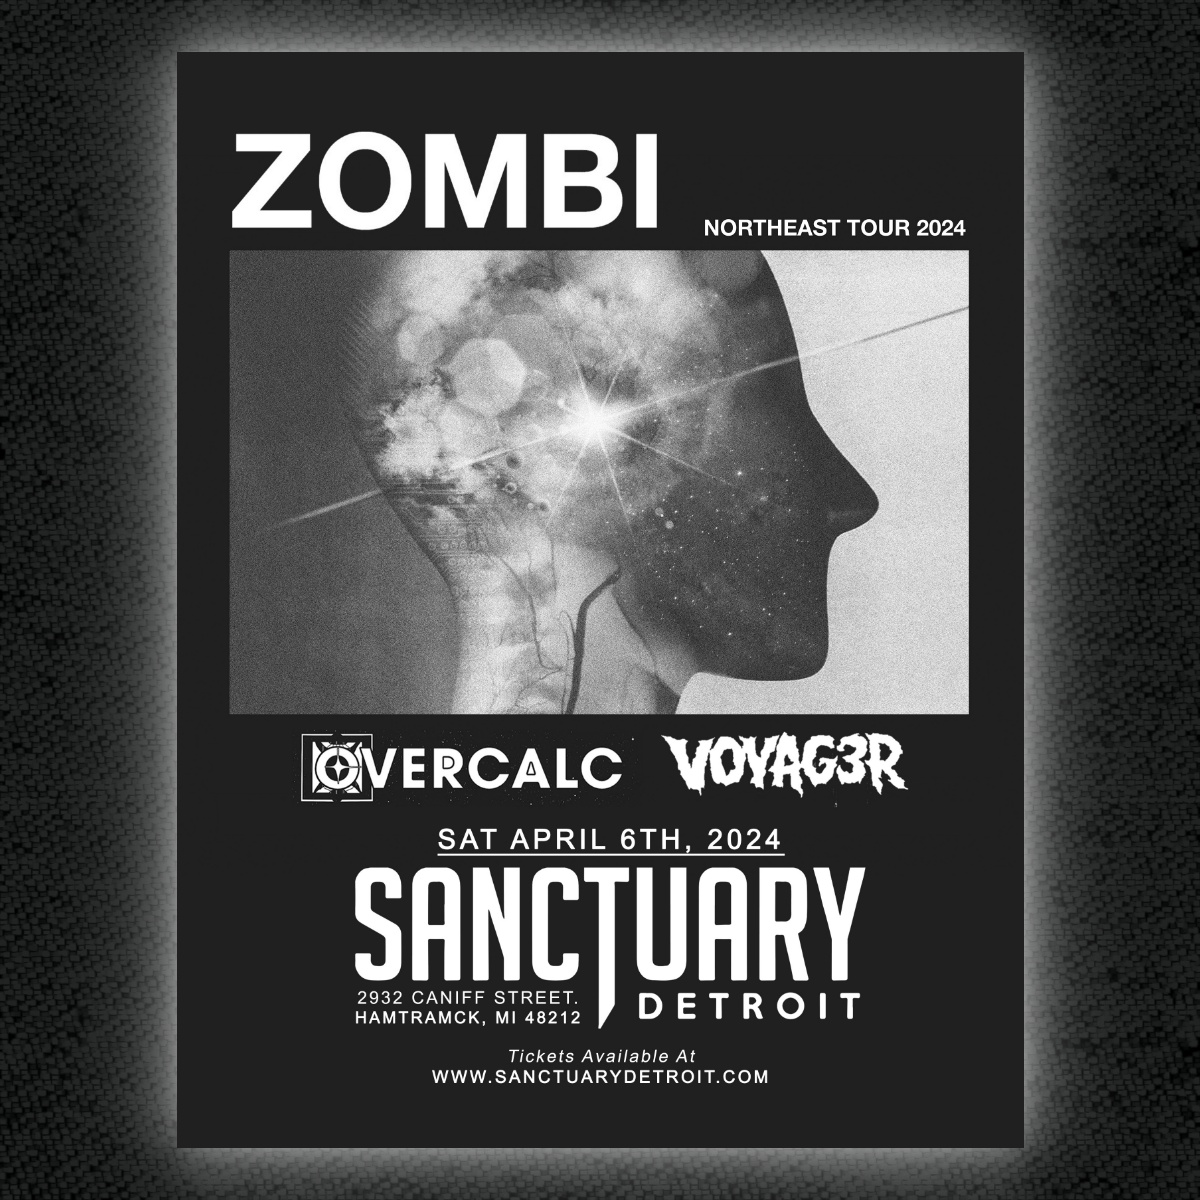 TONIGHT! Zombi hits The Sanctuary with special guests Overcalc & Voyag3r !! Doors at 7pm - Grab your tickets at sanctuarydetroit.com